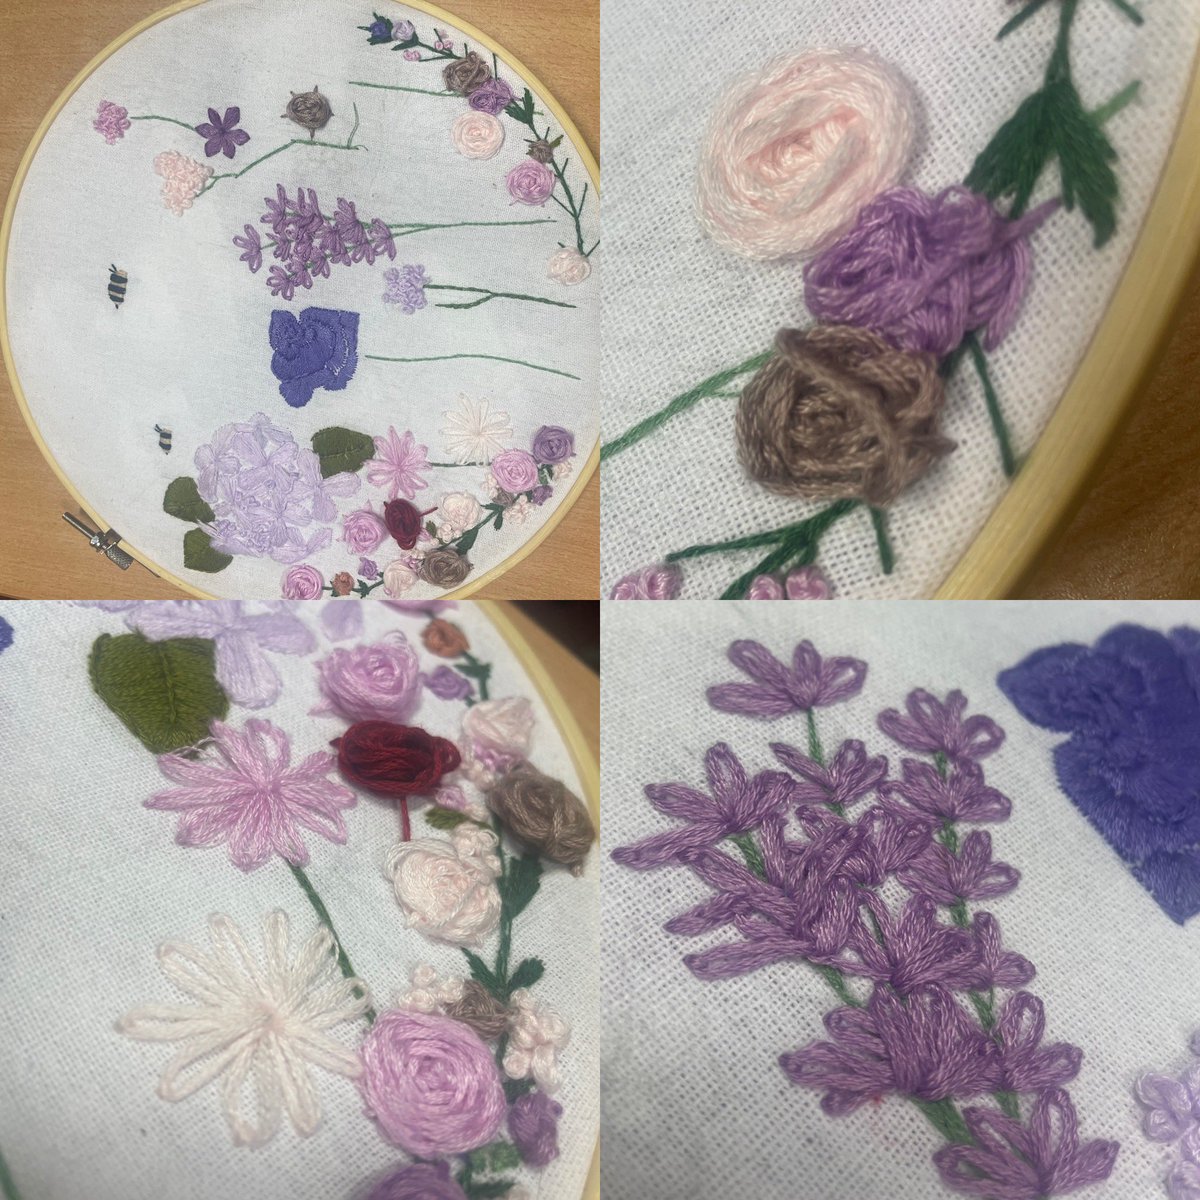 Some second year groups submitting their CBA1 this week. Pictures here show only a fraction of the fantastic effort and attention to detail put in! Well done everyone! #embroidery #embroideryhoops #craft 🪡🧵 @StMarysCollege   @jctHomeEc